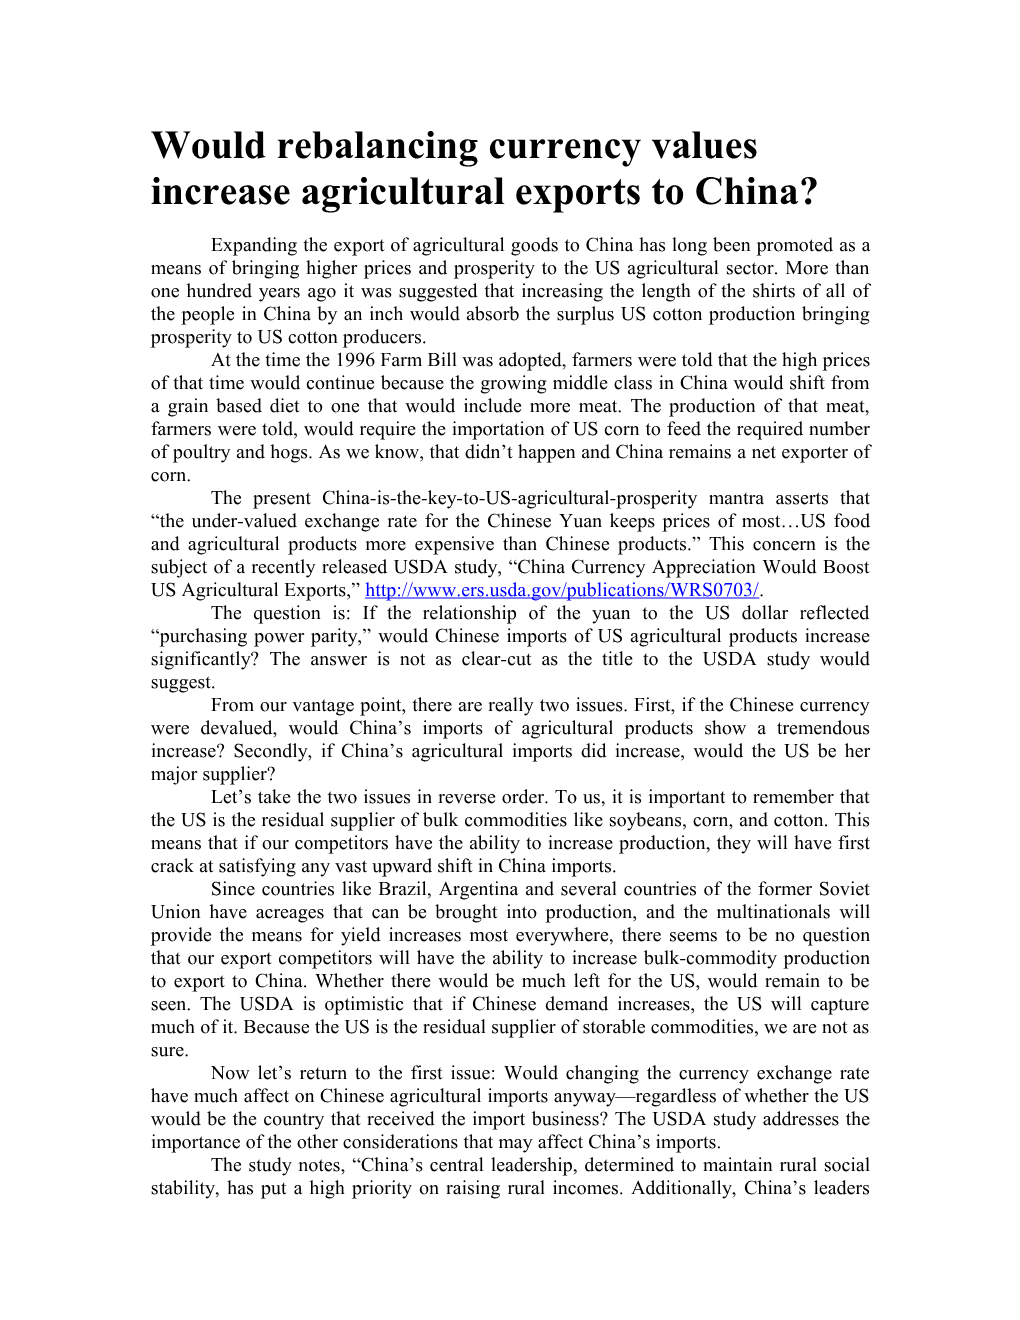 Increased Agricultural Exports to China: Hope Springs Eternal